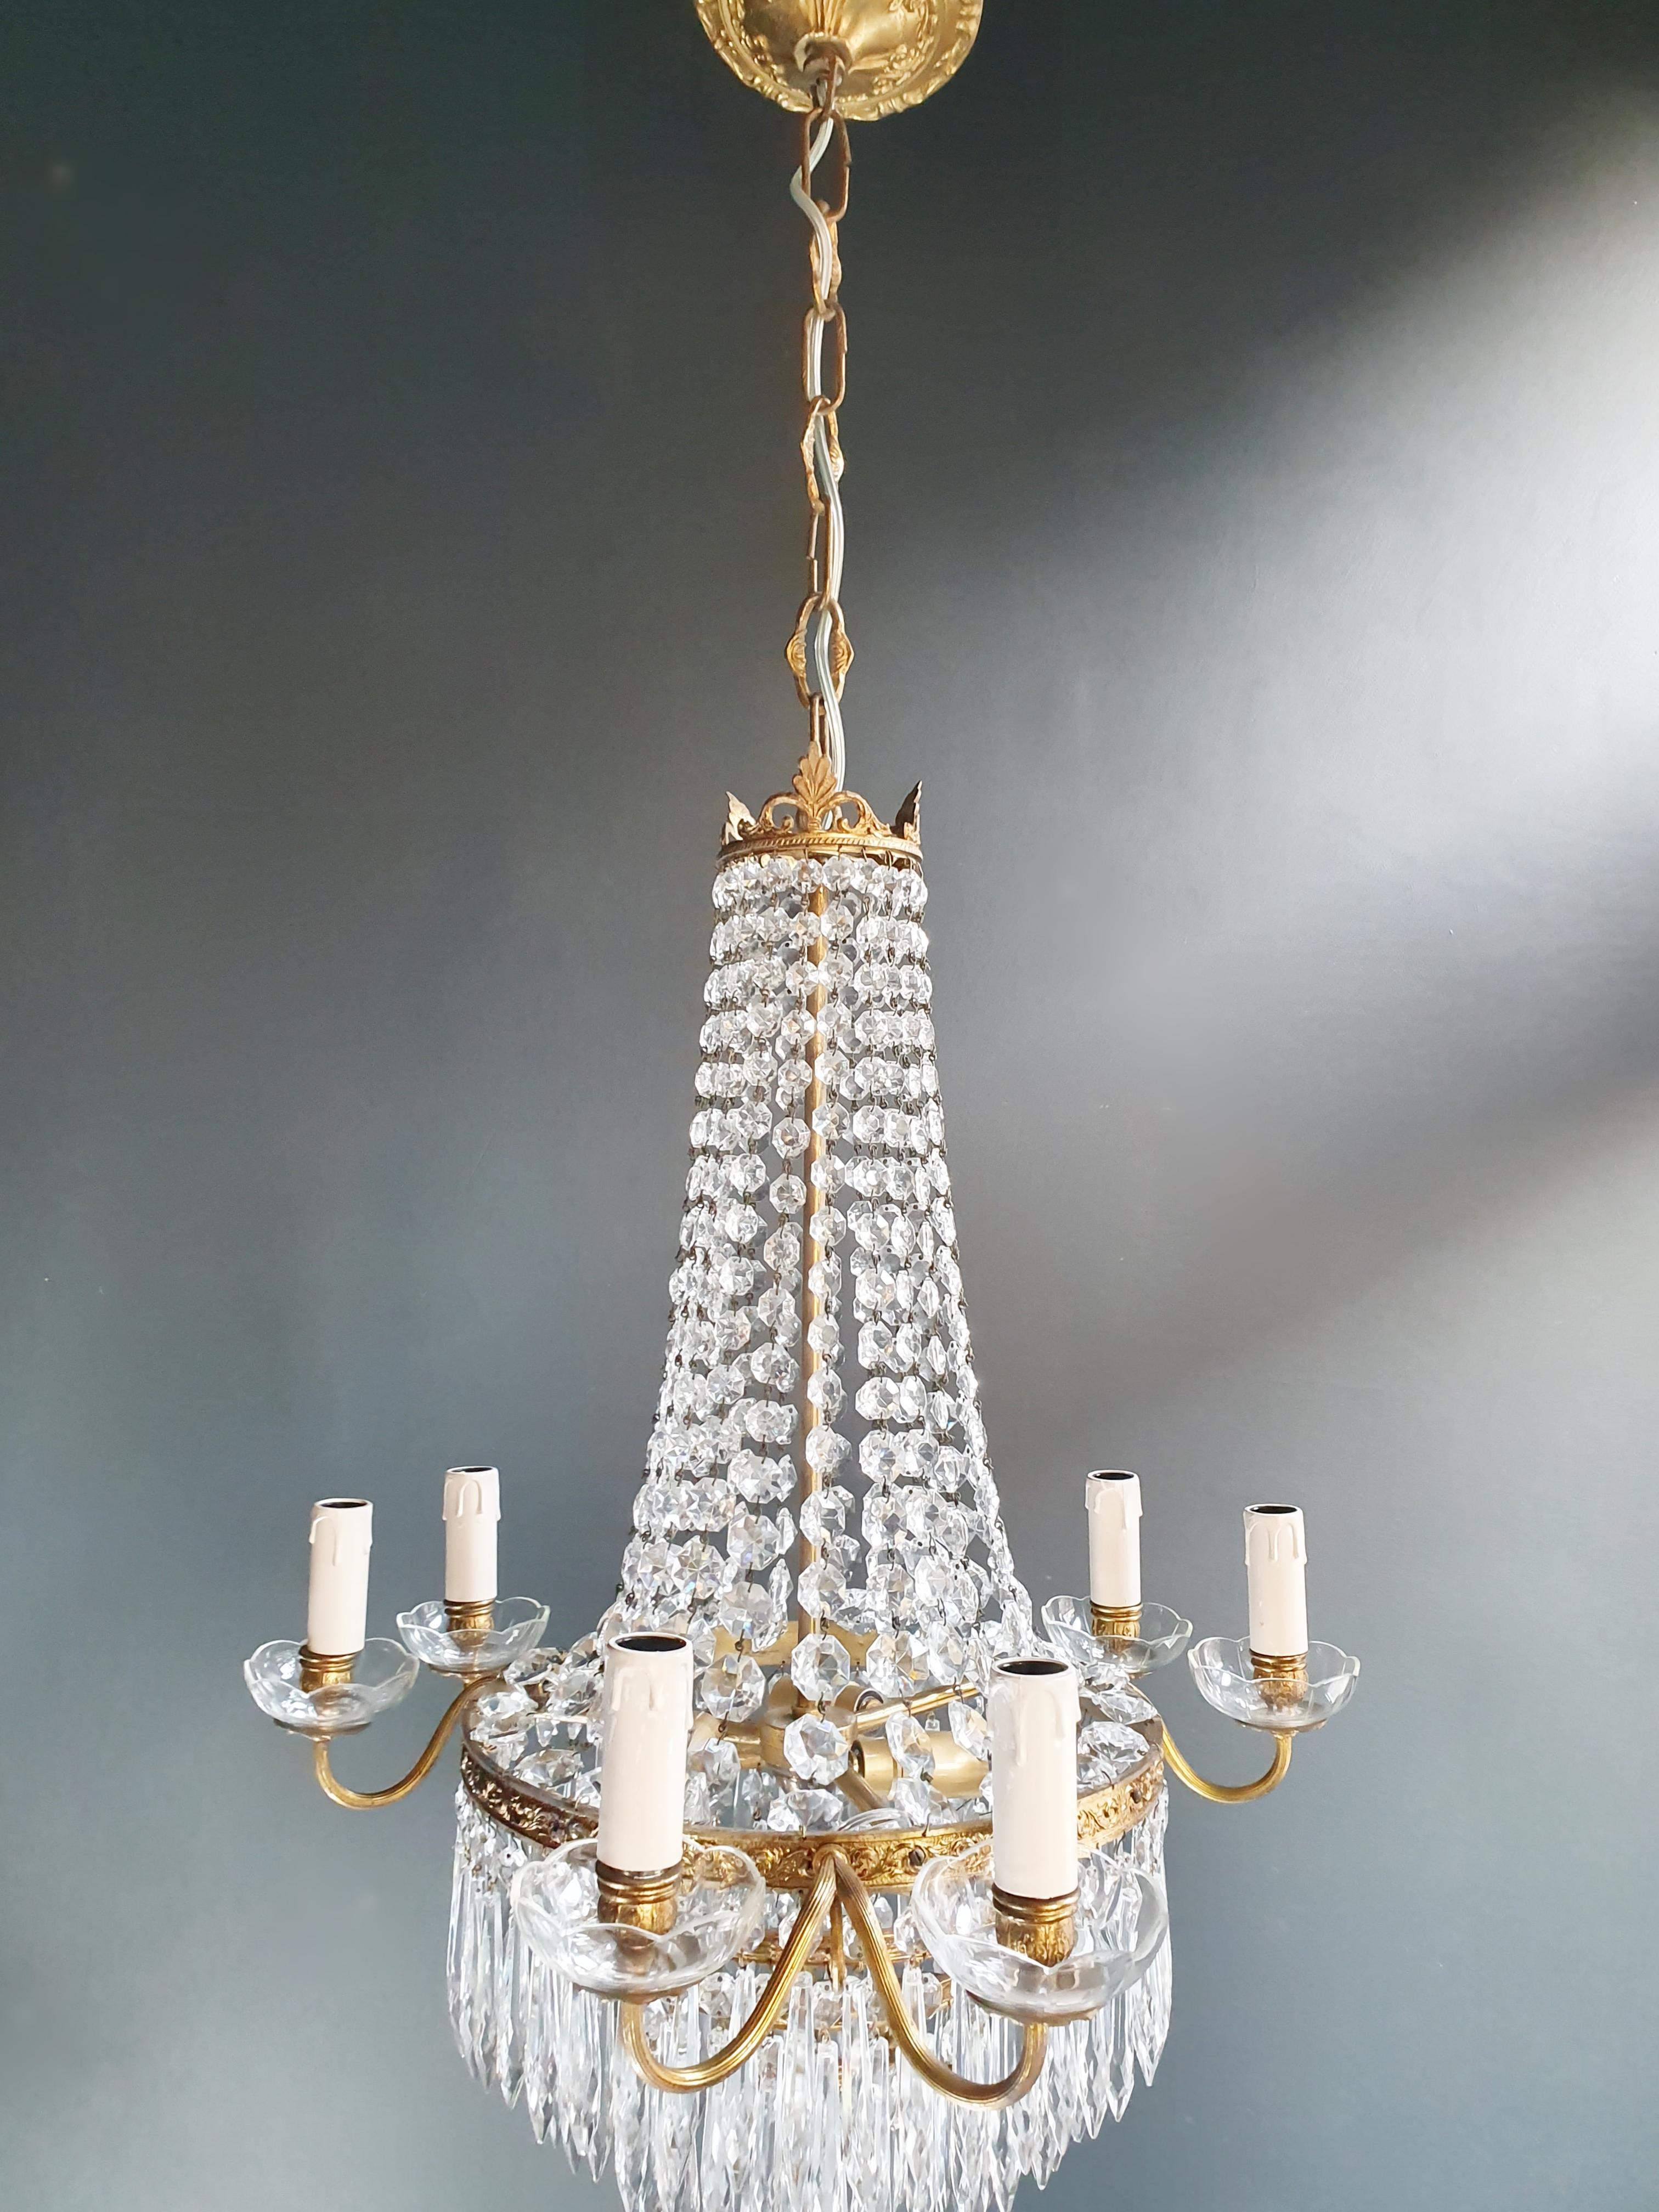 Hand-Knotted Fine Brass Empire Sac a Pearl Chandelier Crystal Lustre Ceiling Lamp Antique